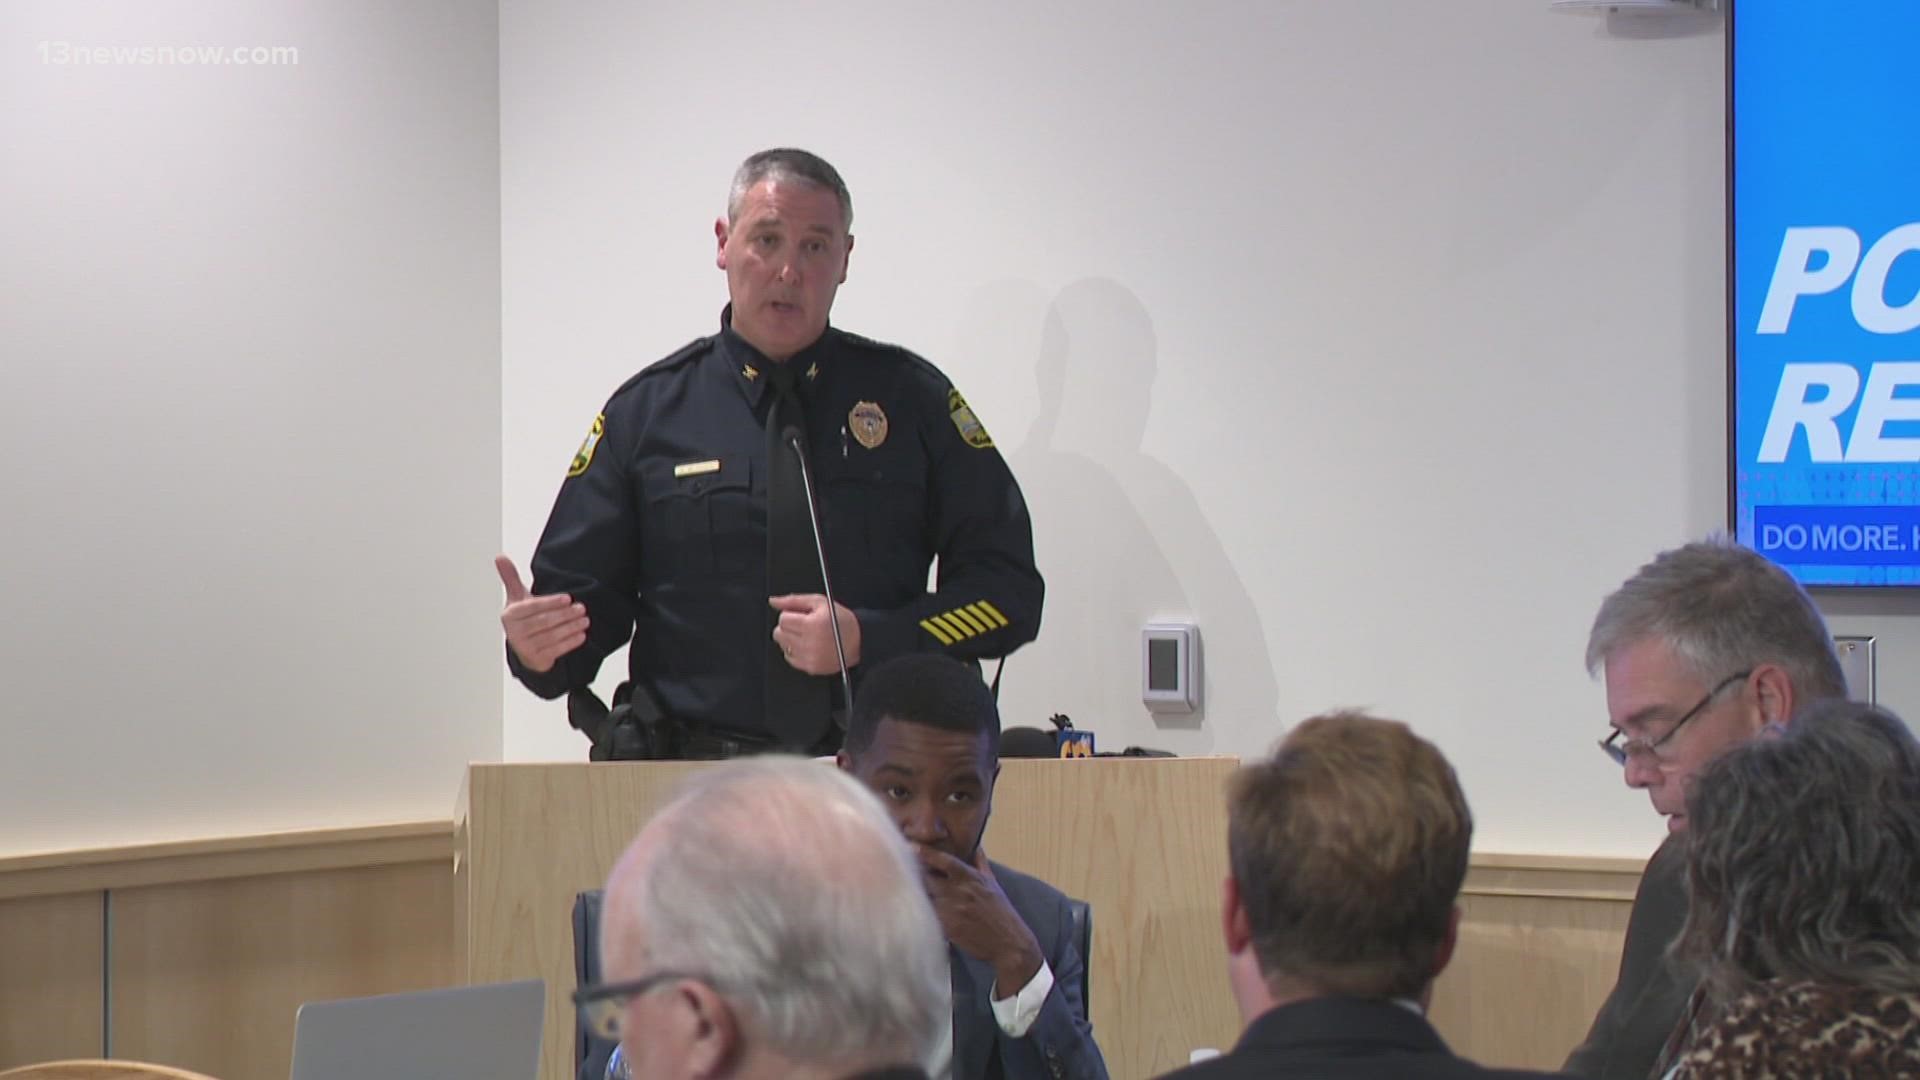 From Shotspotter, e-ticketing and cameras, Virginia Beach Police Chief Paul Neudigate laid out tools meant to improve policing and efficiency at the department.